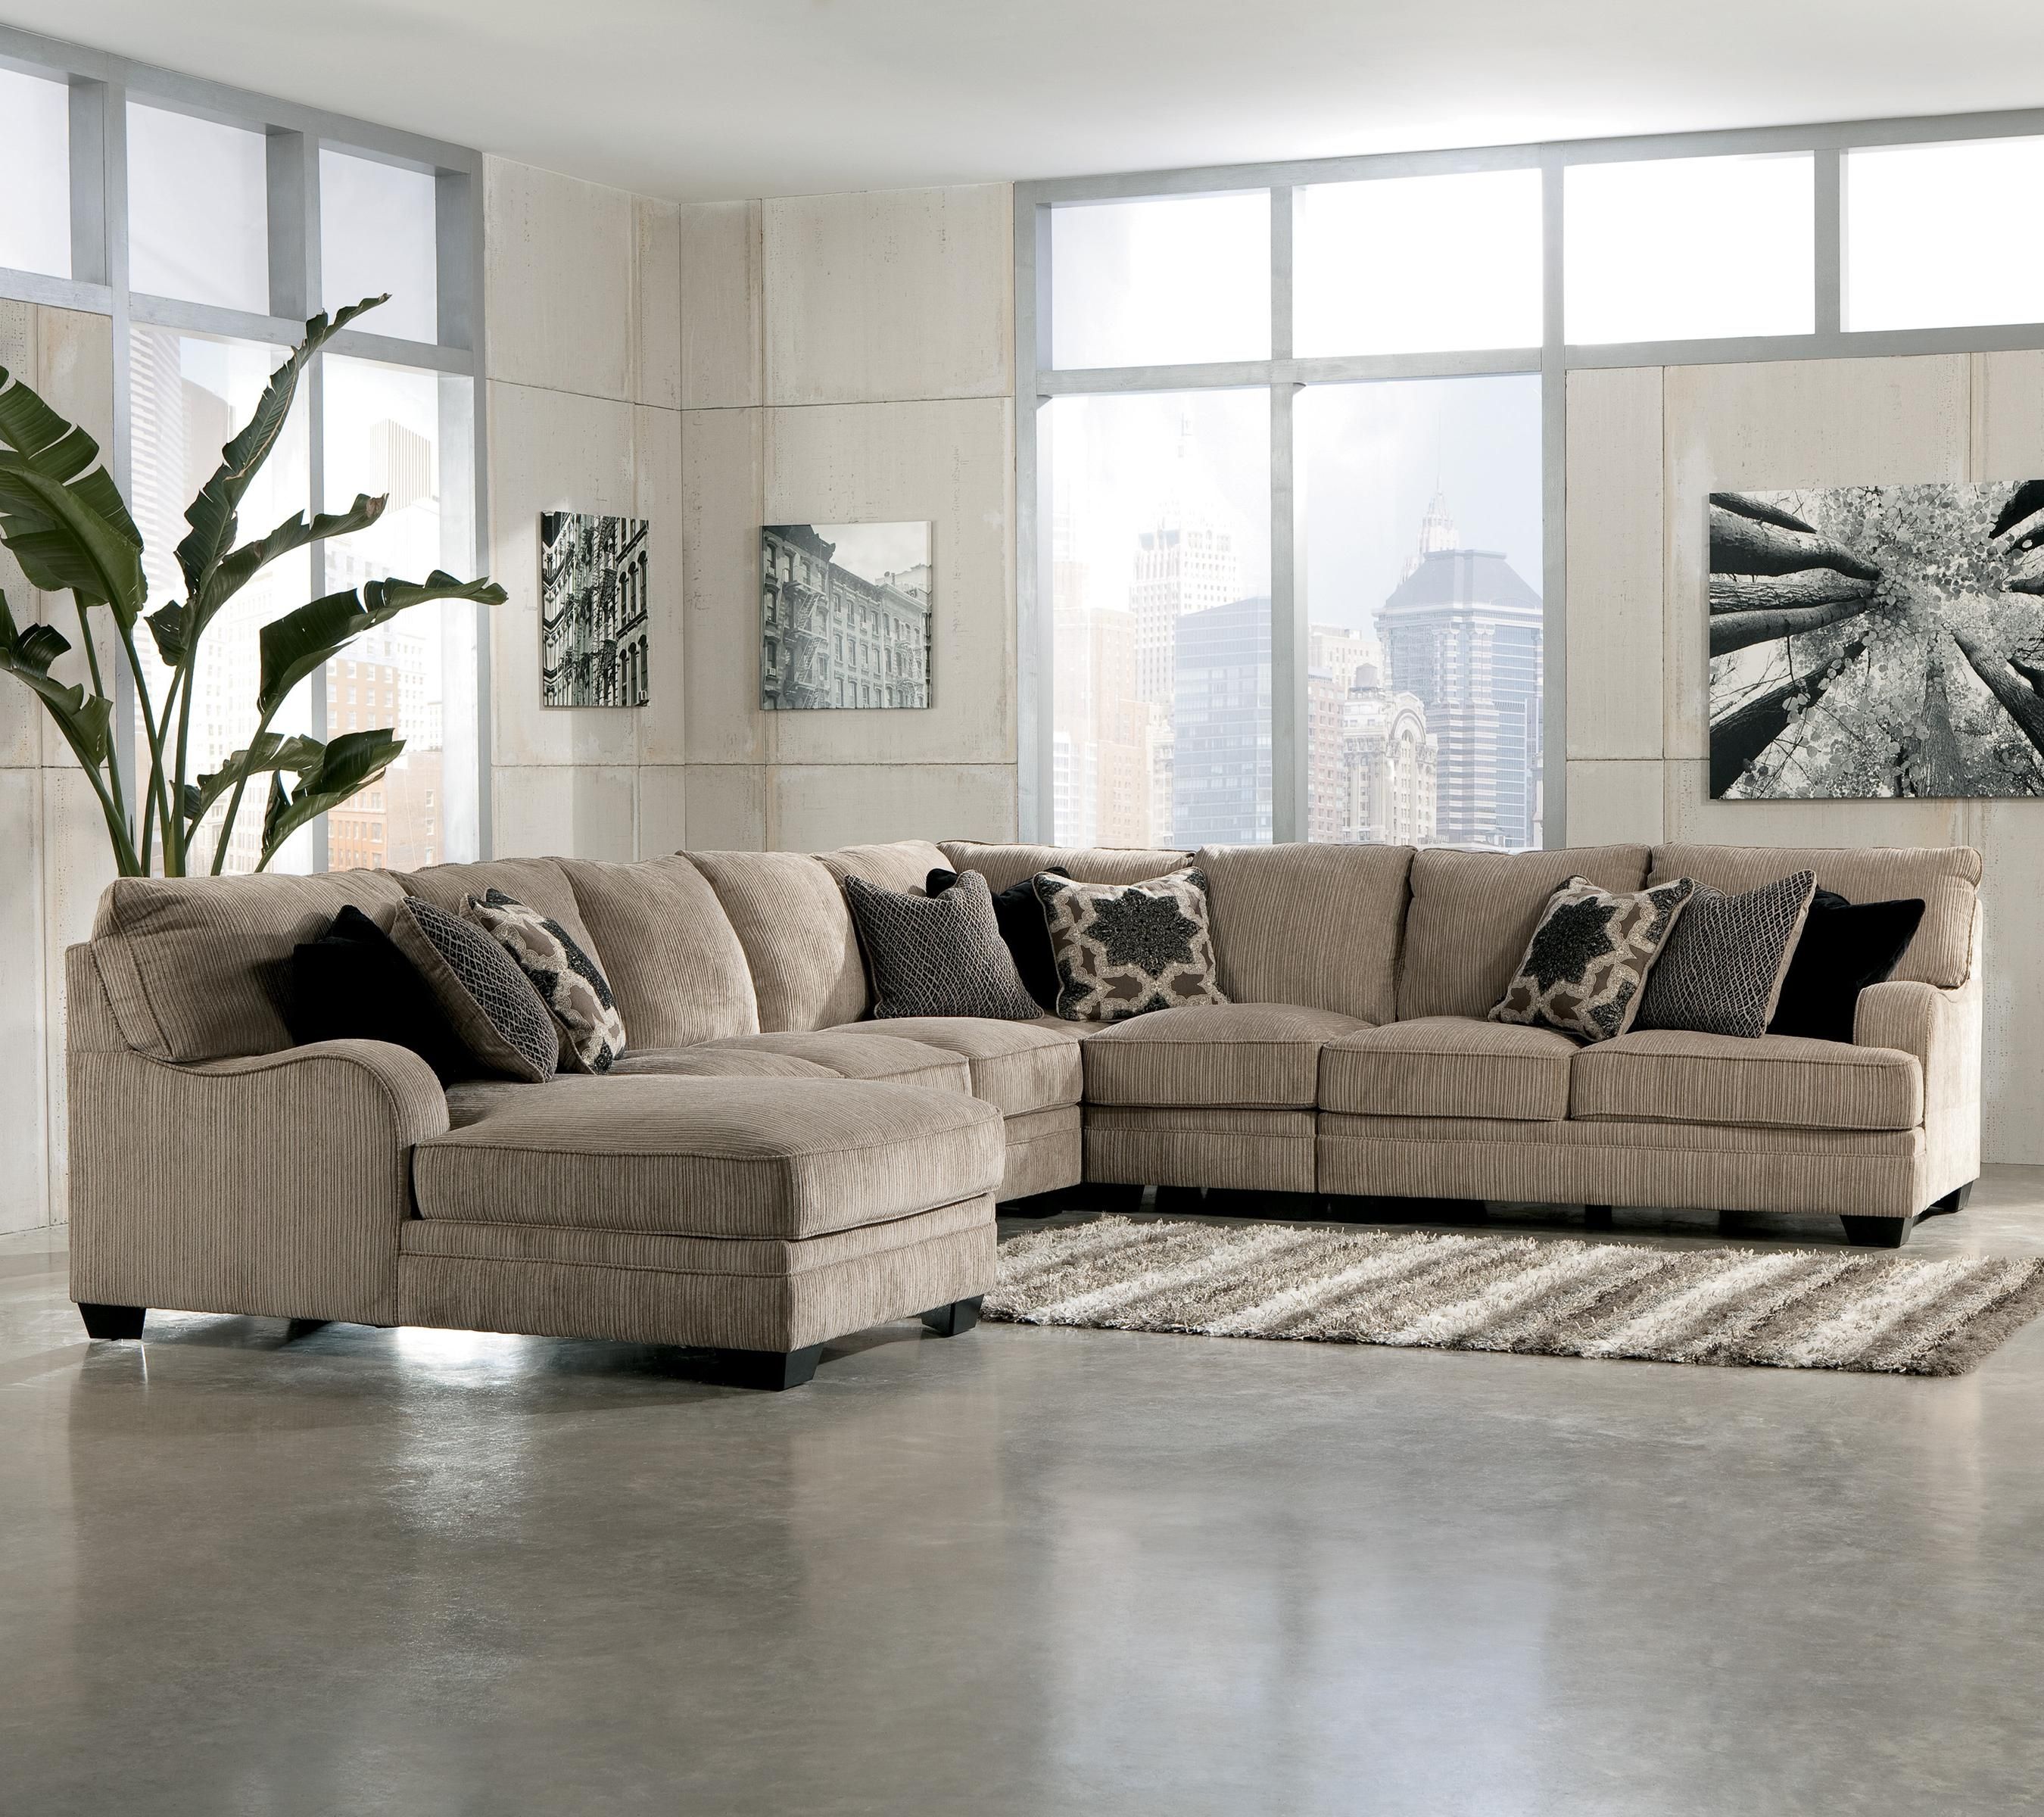 12 Best Ideas 3 Piece Sectional Sofa Slipcovers